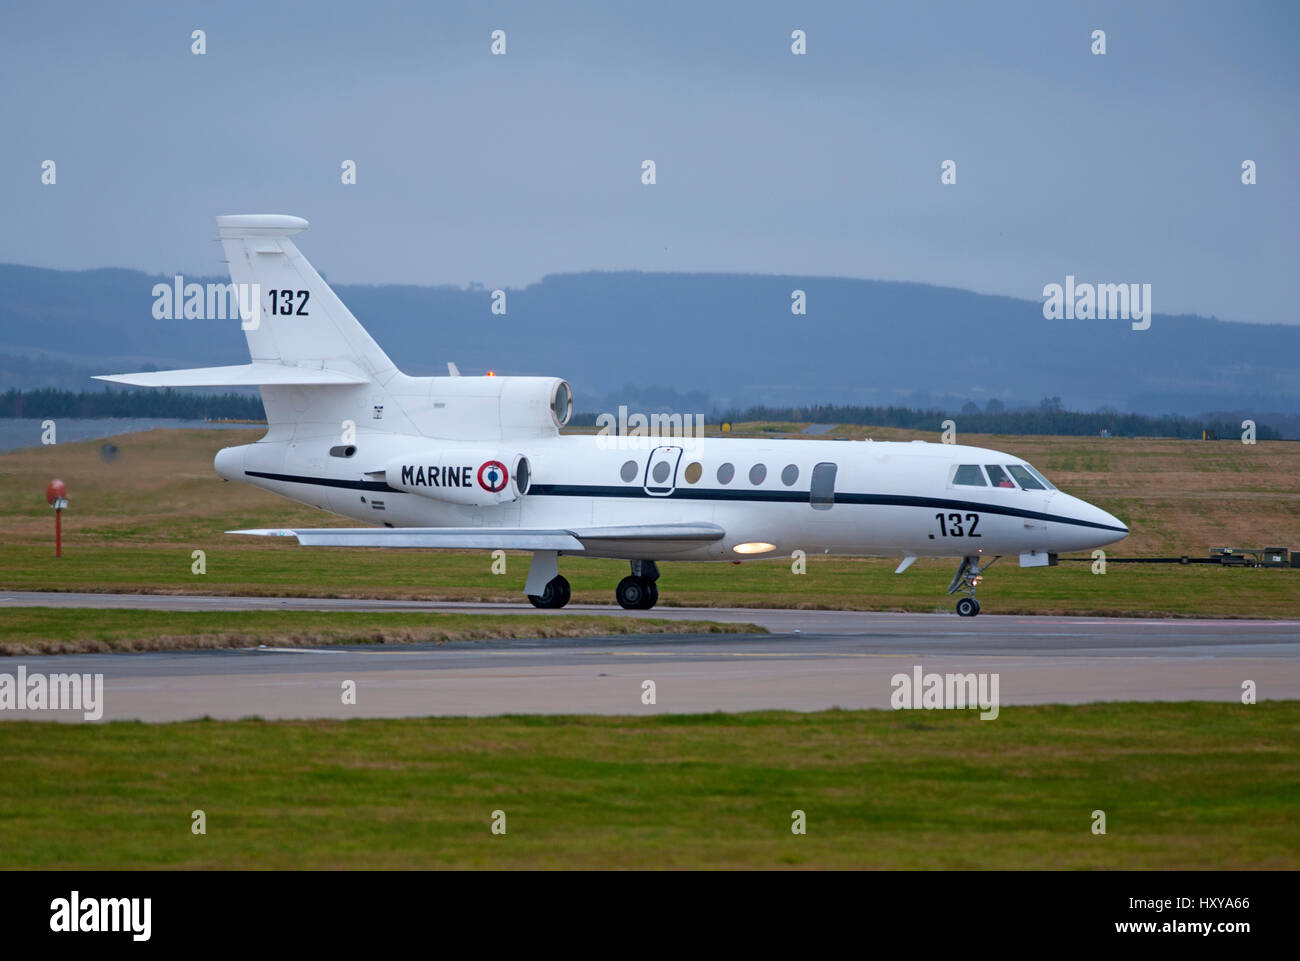 French Navy Dassault Falcon 50 SURMAR arriving at RAF Lossiemouth as part of the 2017 Joint Warrior exercise in Morayshire. North East Scotland. Stock Photo